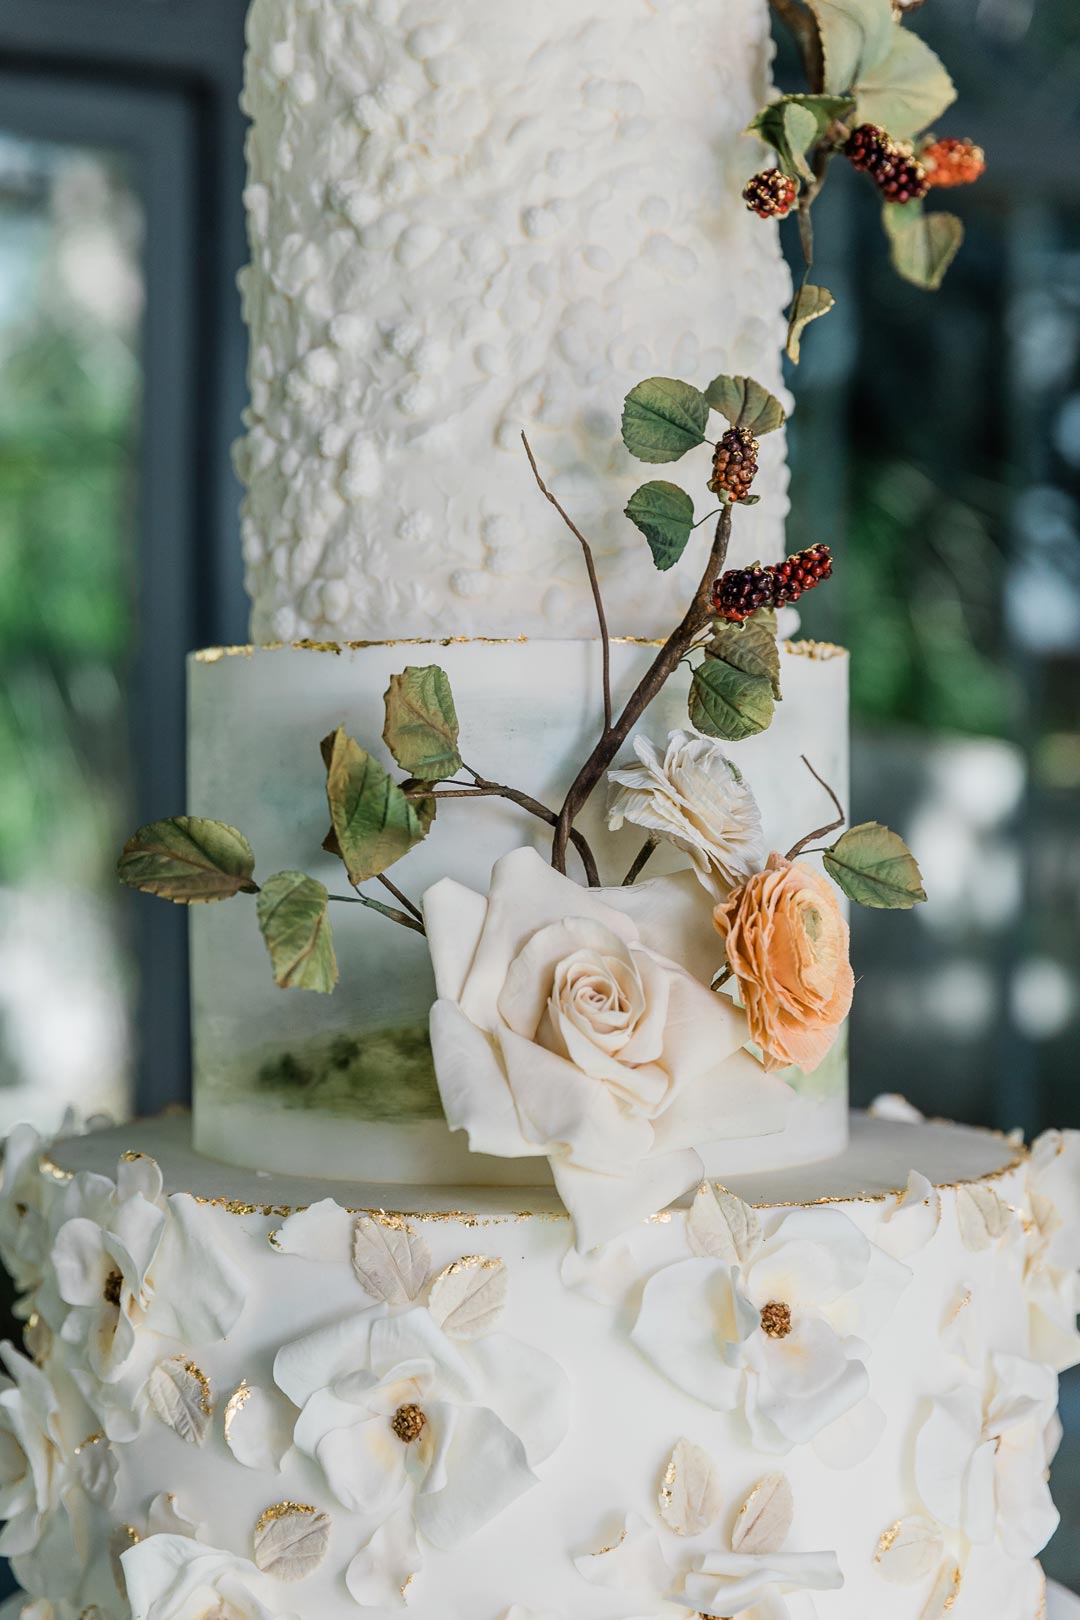 Wedding Cake with Floral decorations